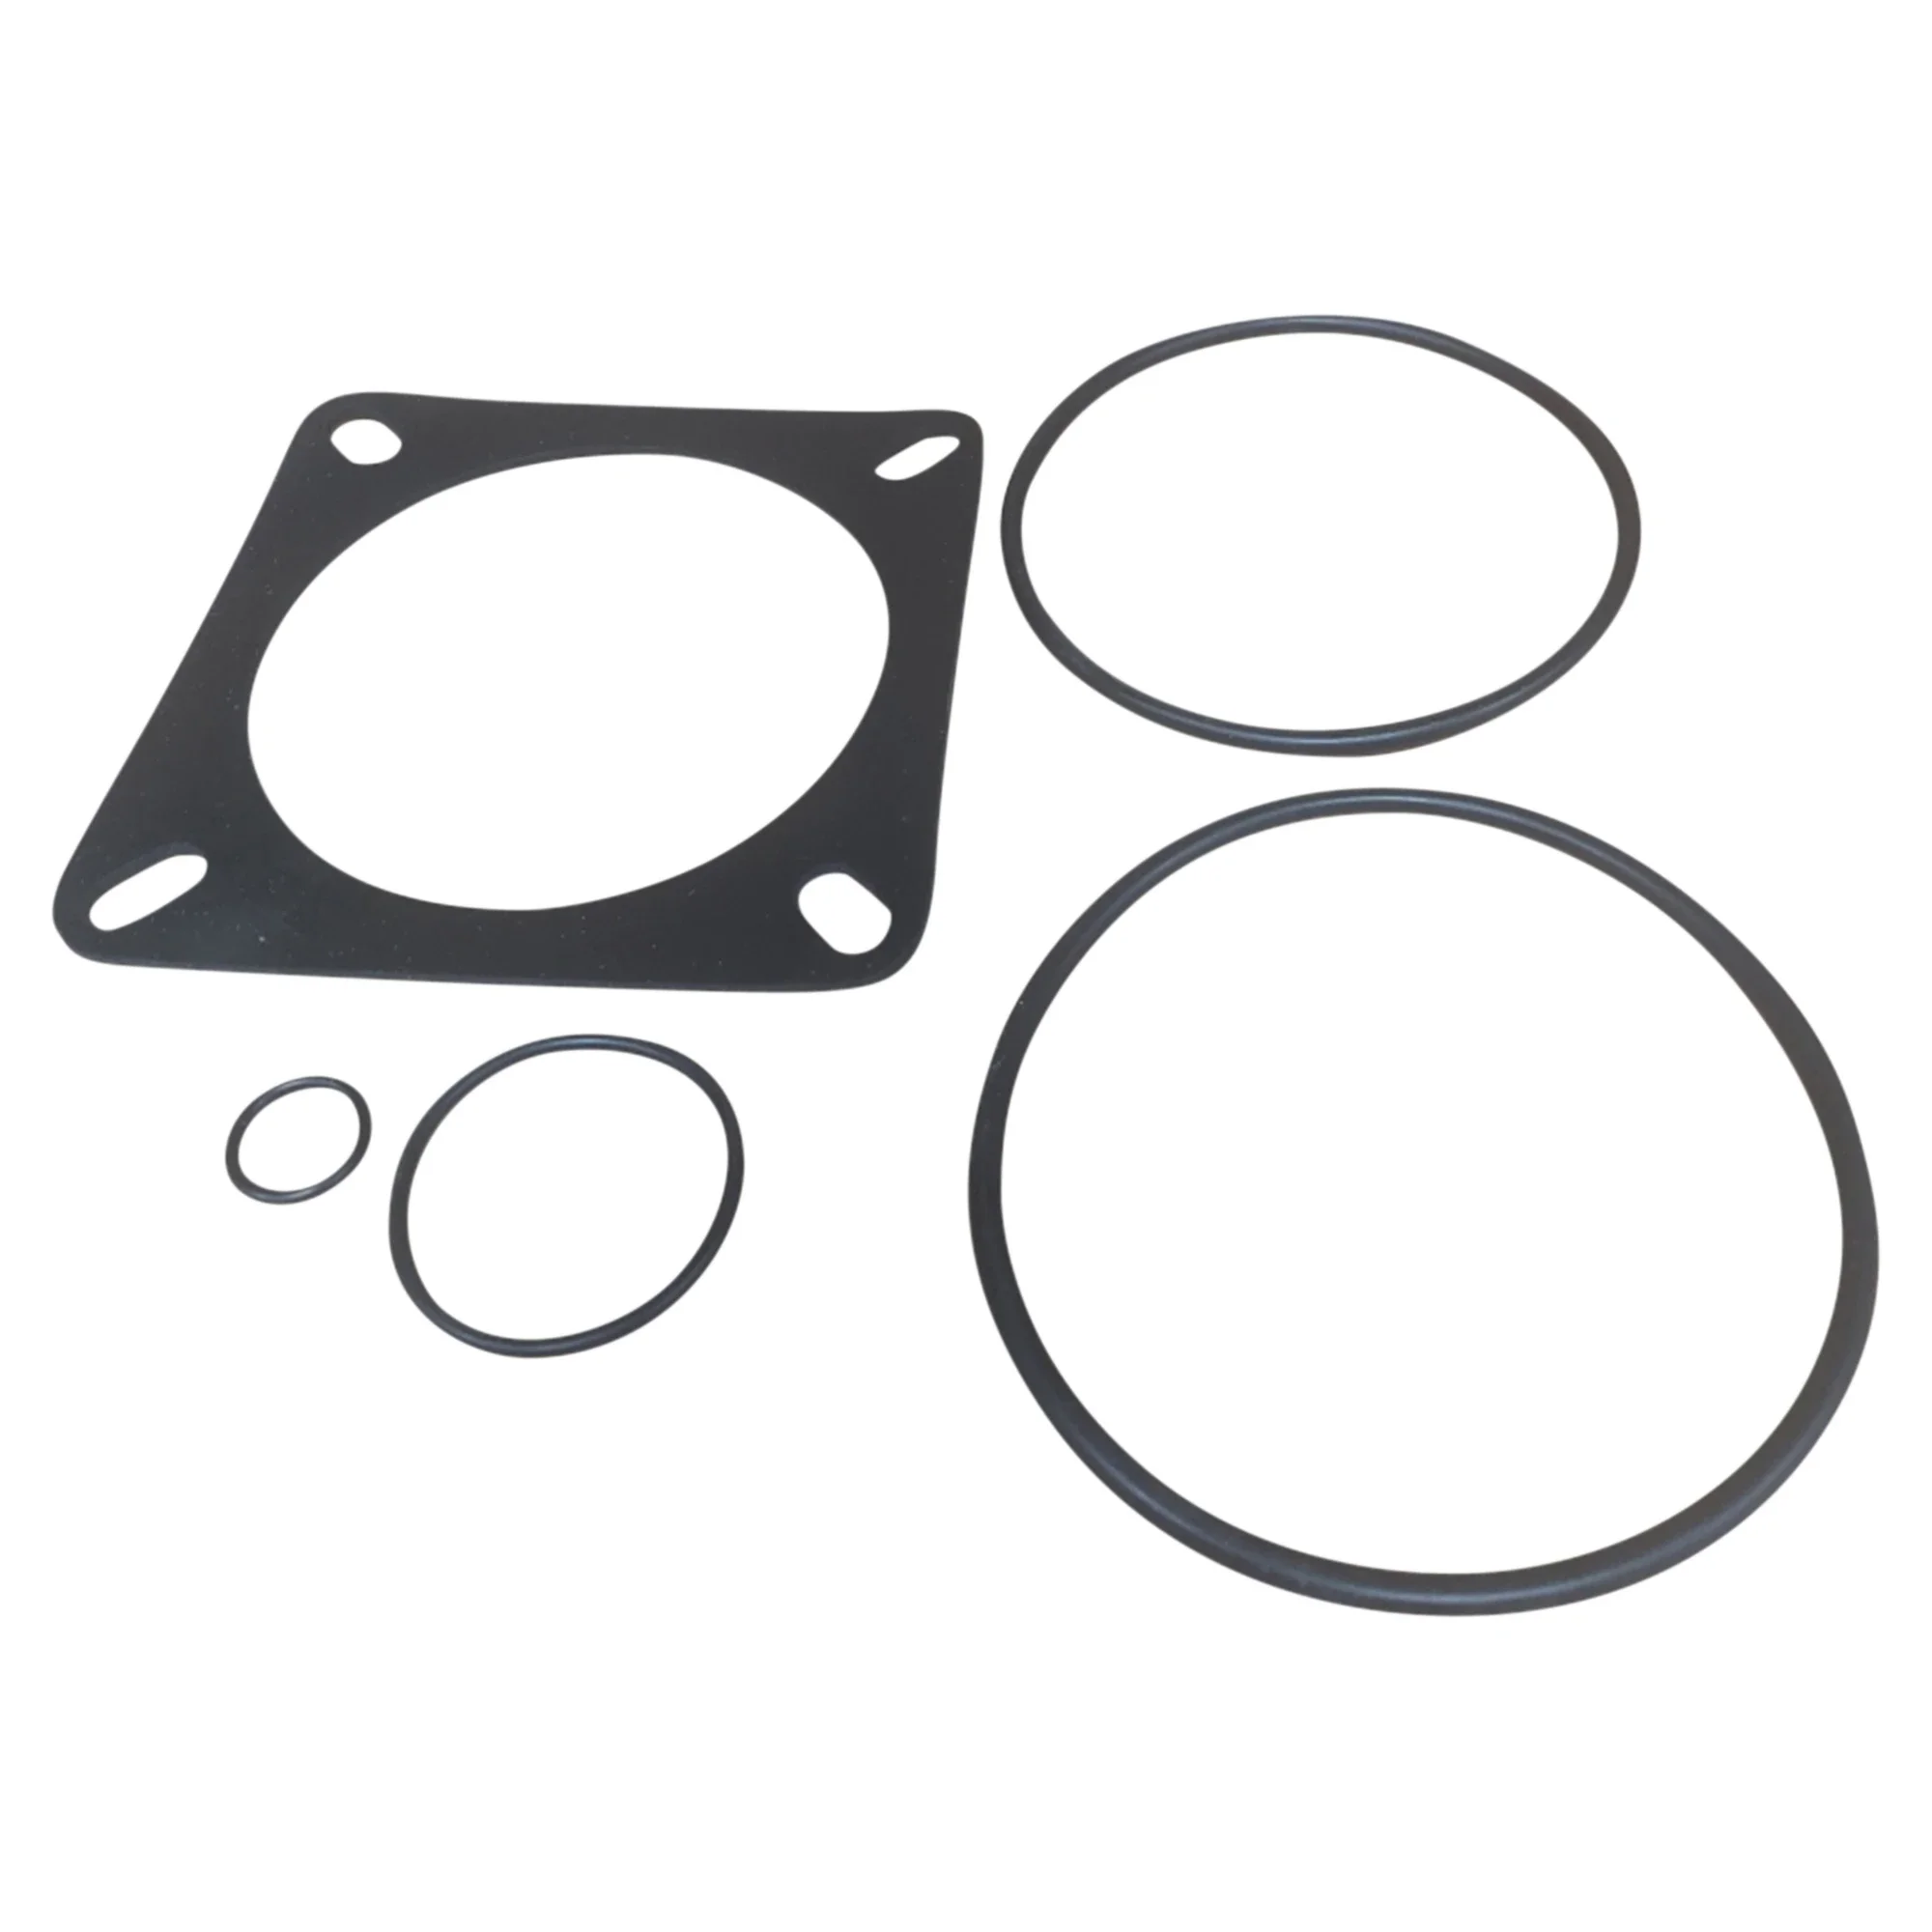 Wastebuilt® Replacement for Wittke Seal Kit Filter Head